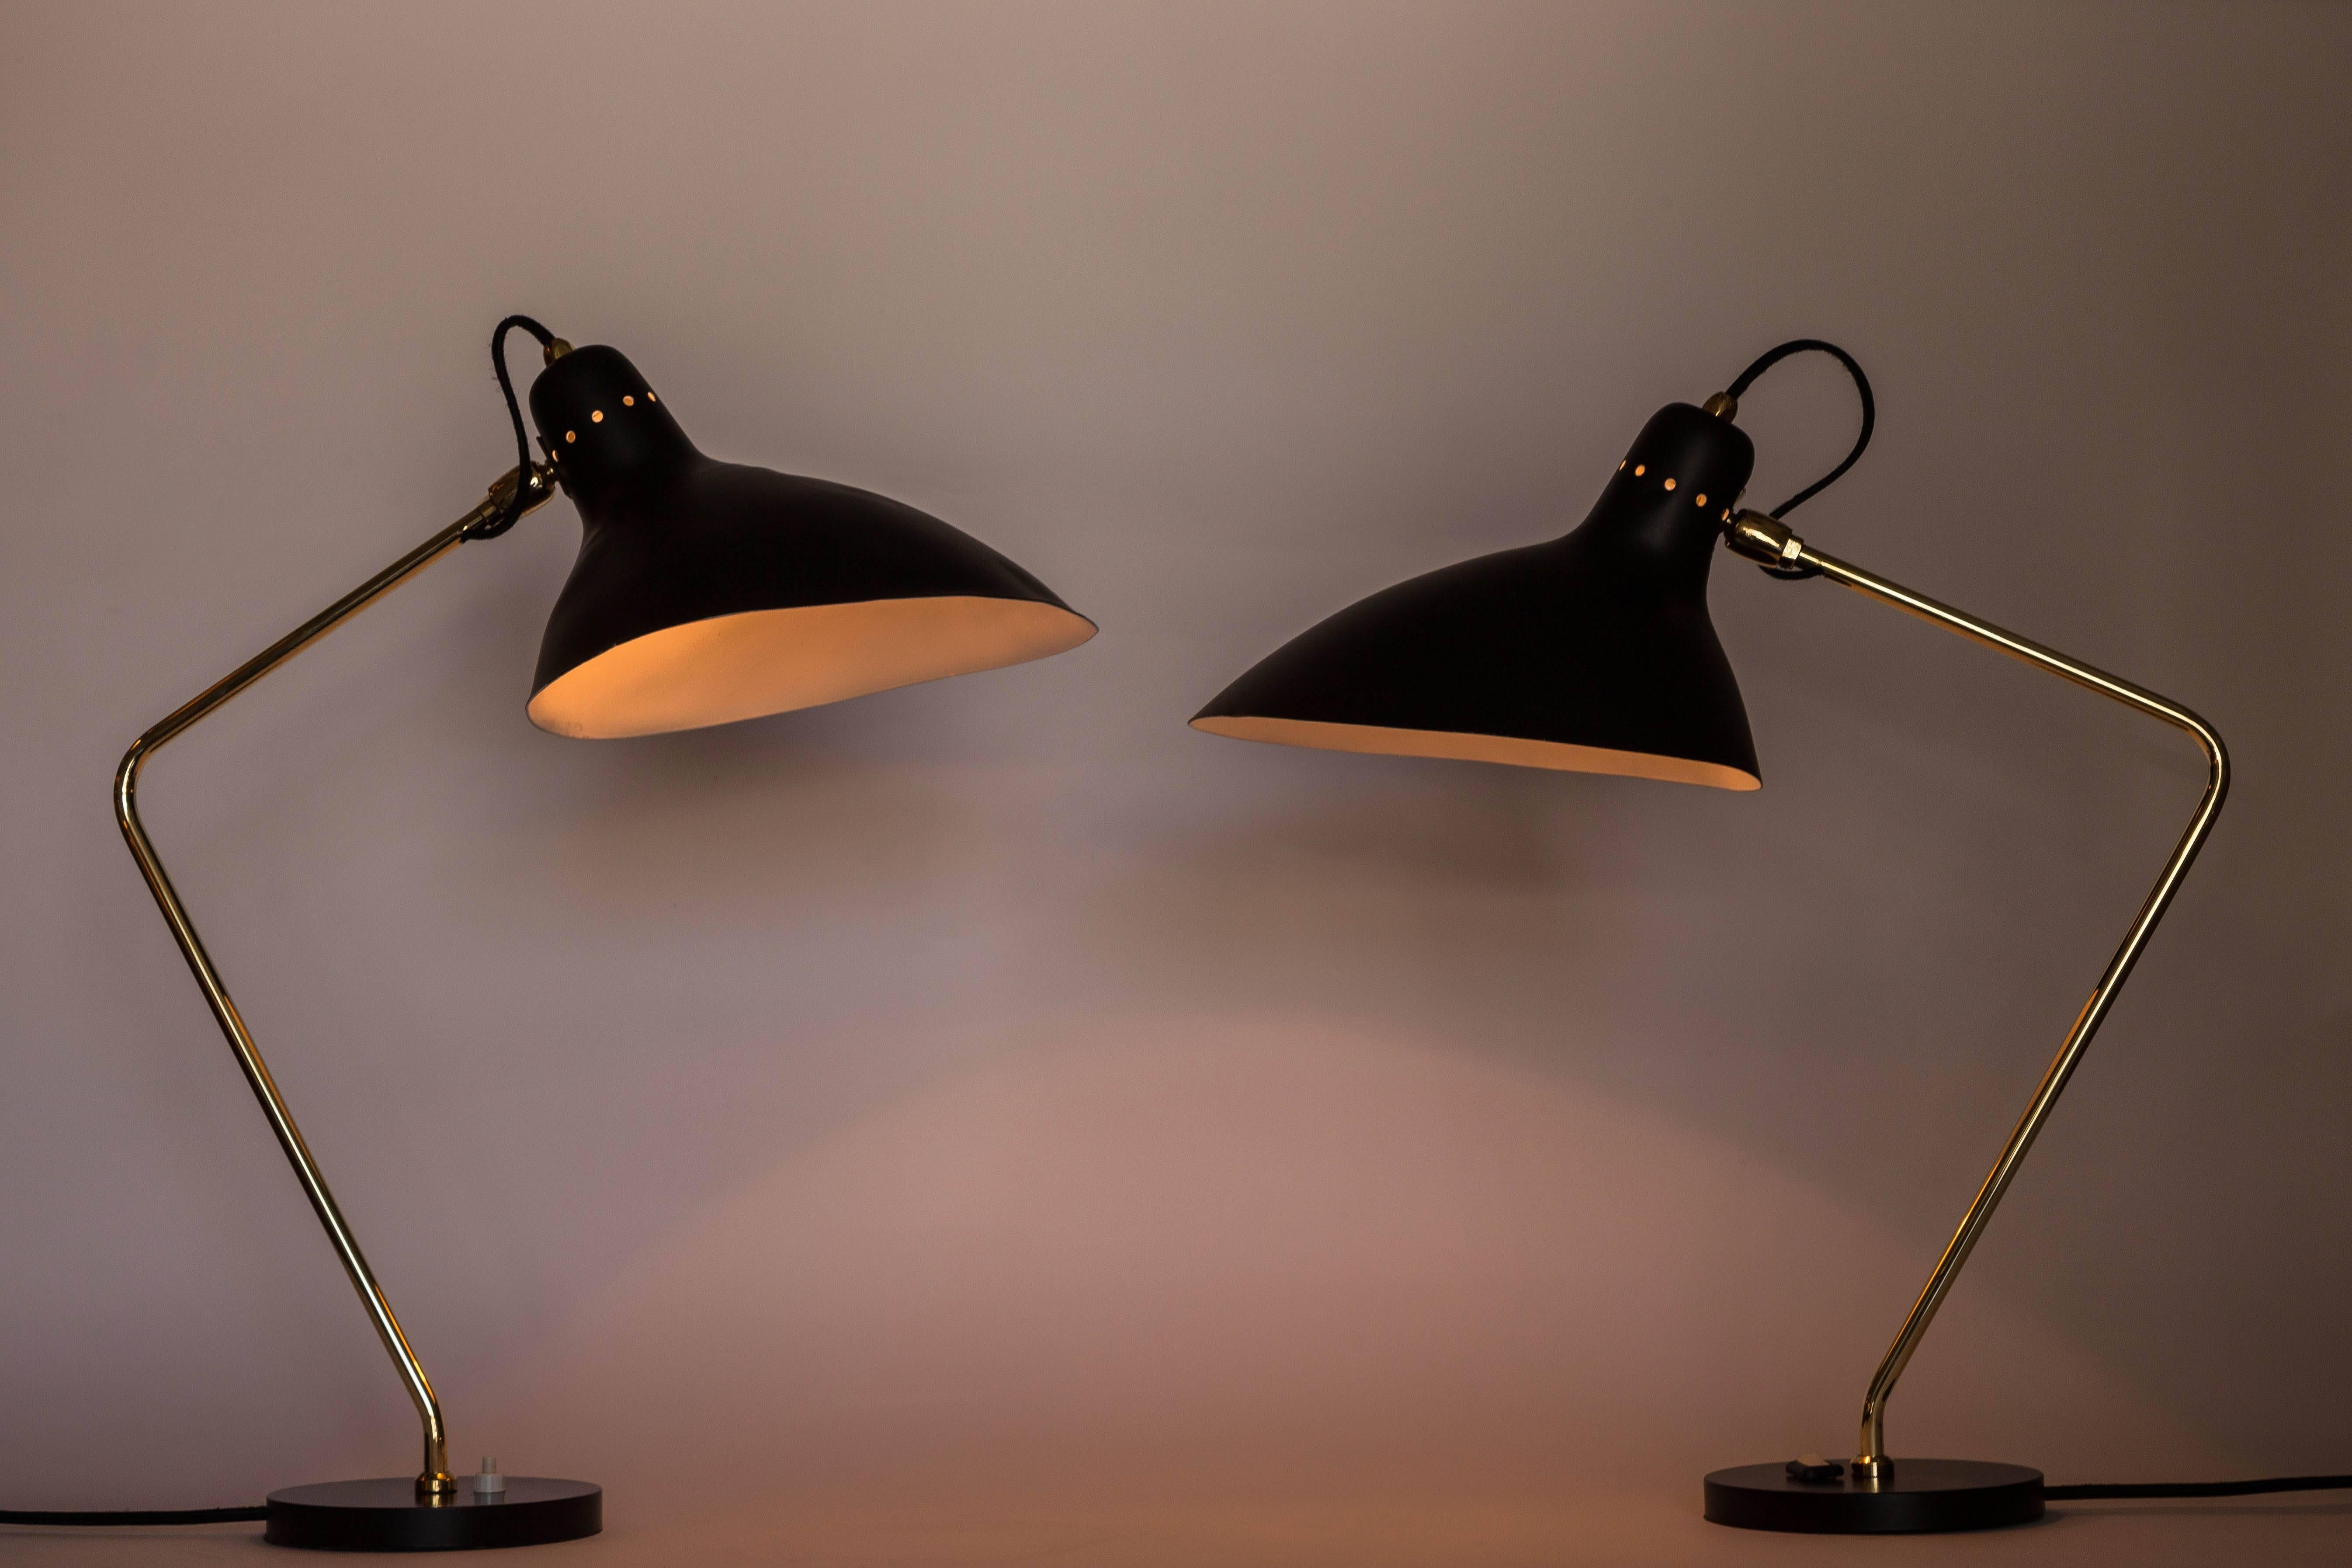 Pair of 1950s Boris Lacroix table lamps. These rare and elegant table lamps are executed in black metal and brass, France, circa 1950s. A celebrated Art Deco lighting designer who successfully made the transition to Mid-Century Modern idiom, Jean